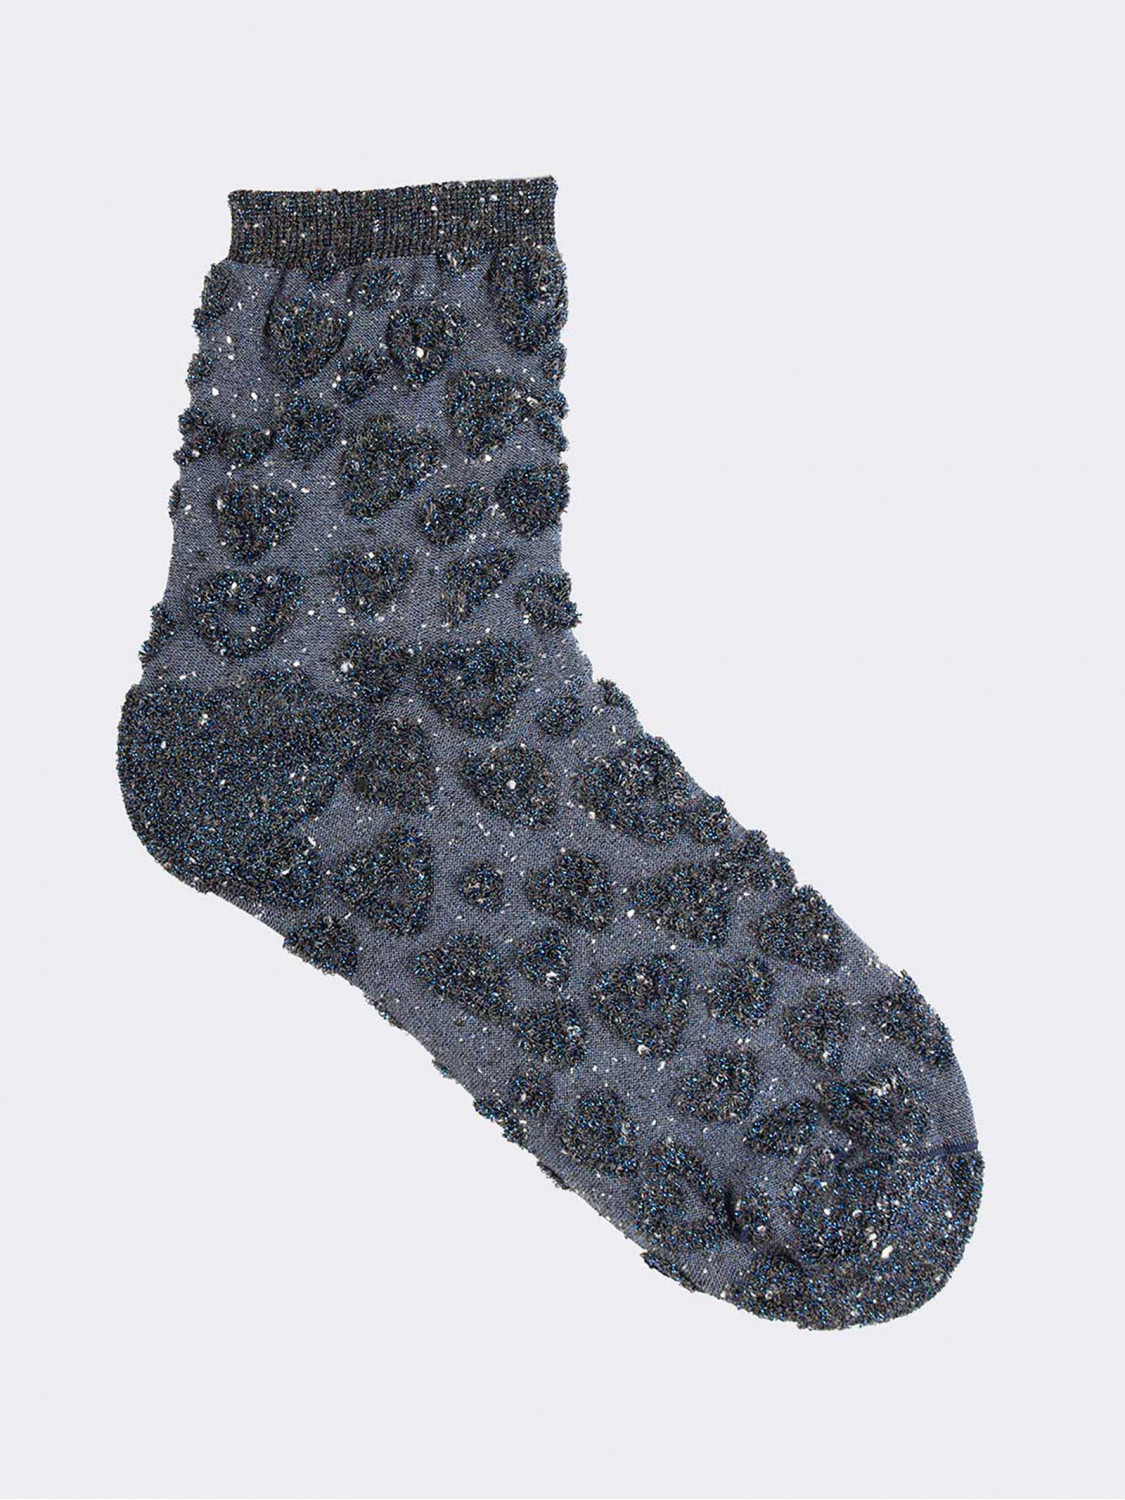 Short socks for woman - made in Italy patterned